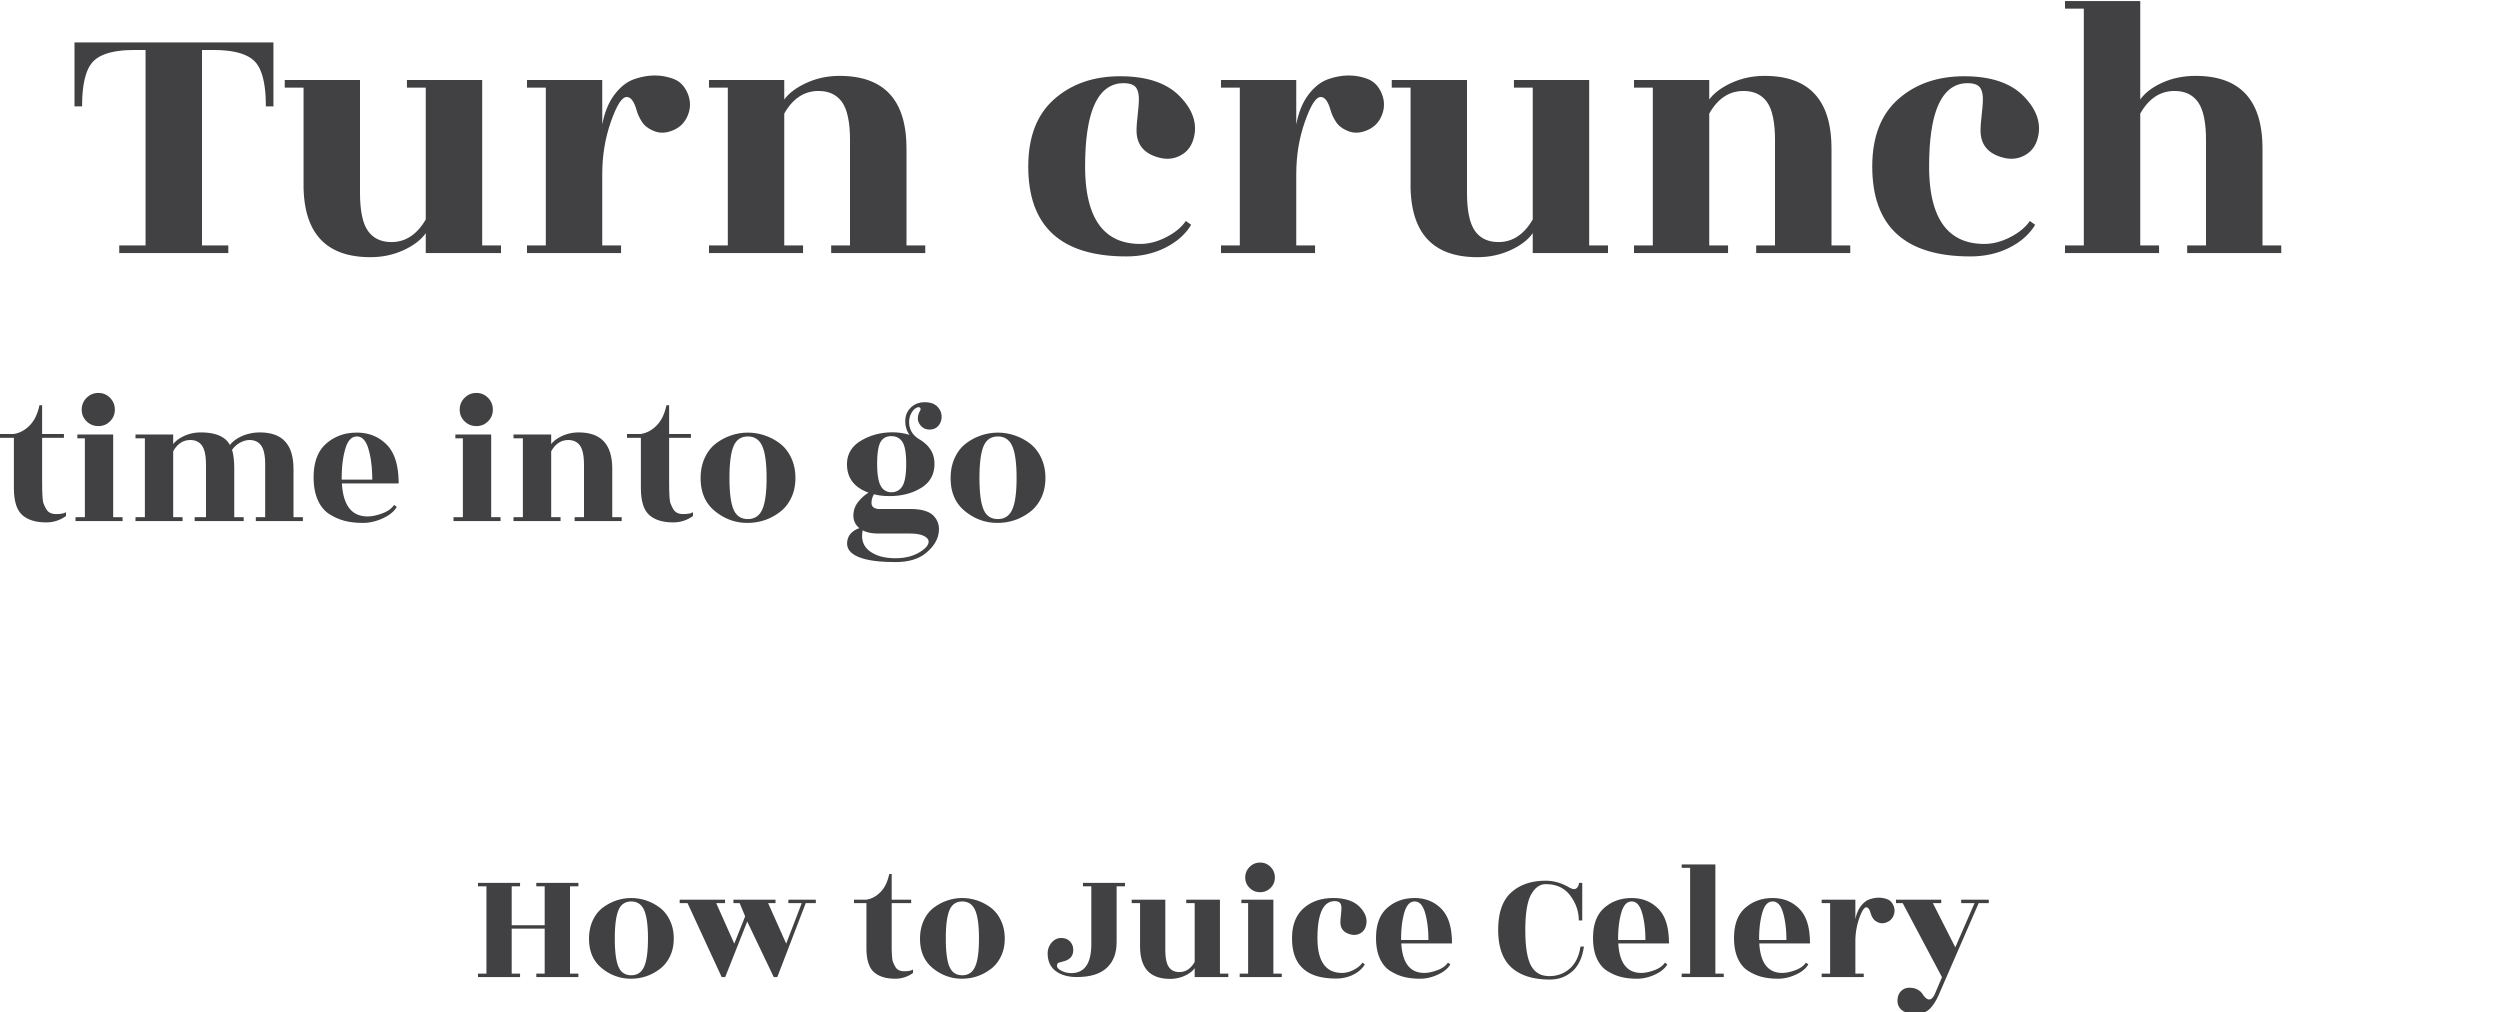 Turn crunch time into go time! How to Juice Celery